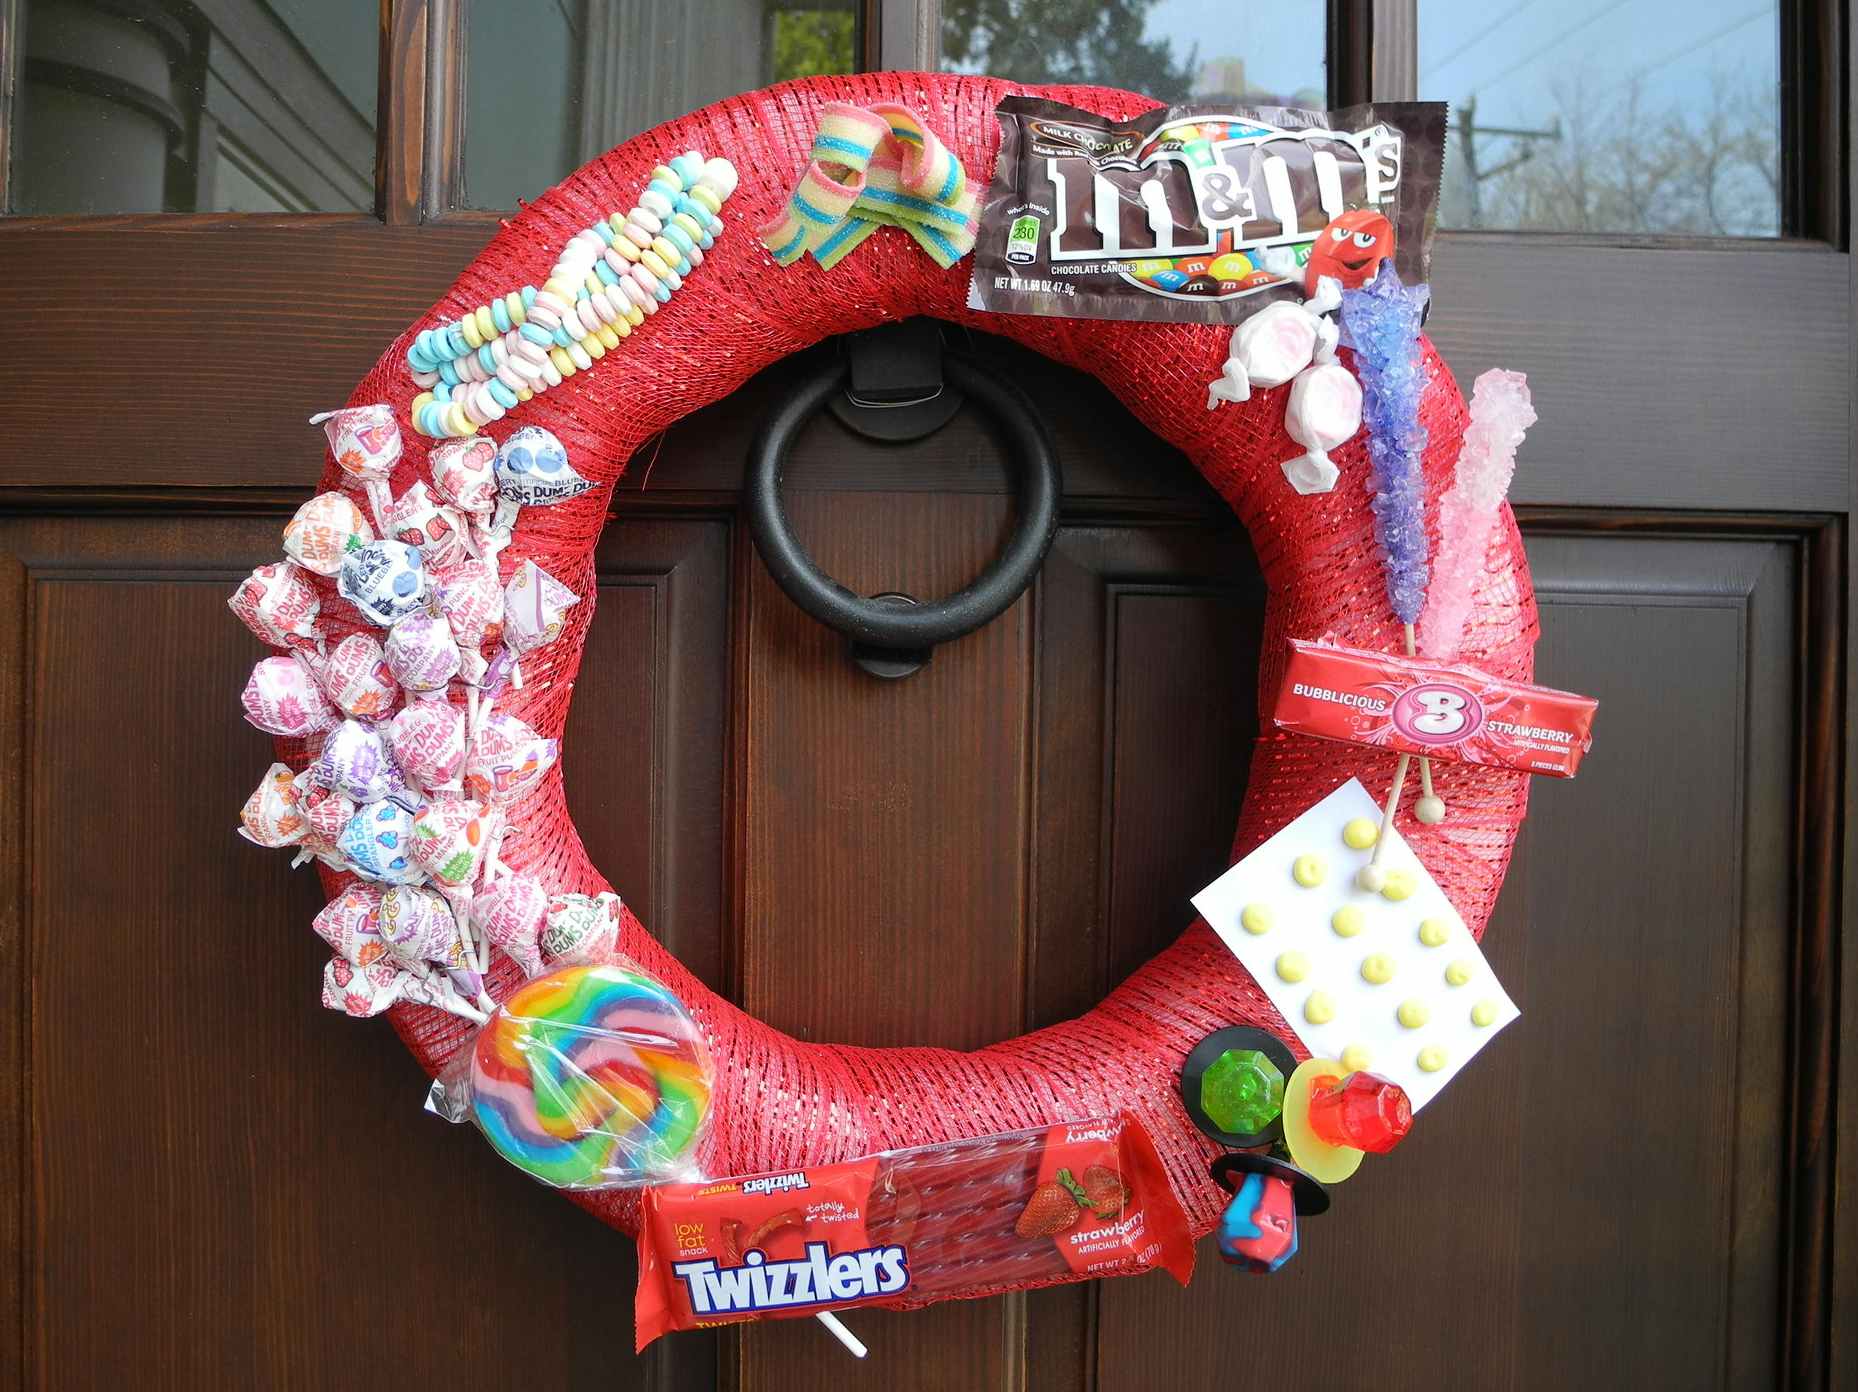 A Christmas door wreath decorated in Halloween candy.